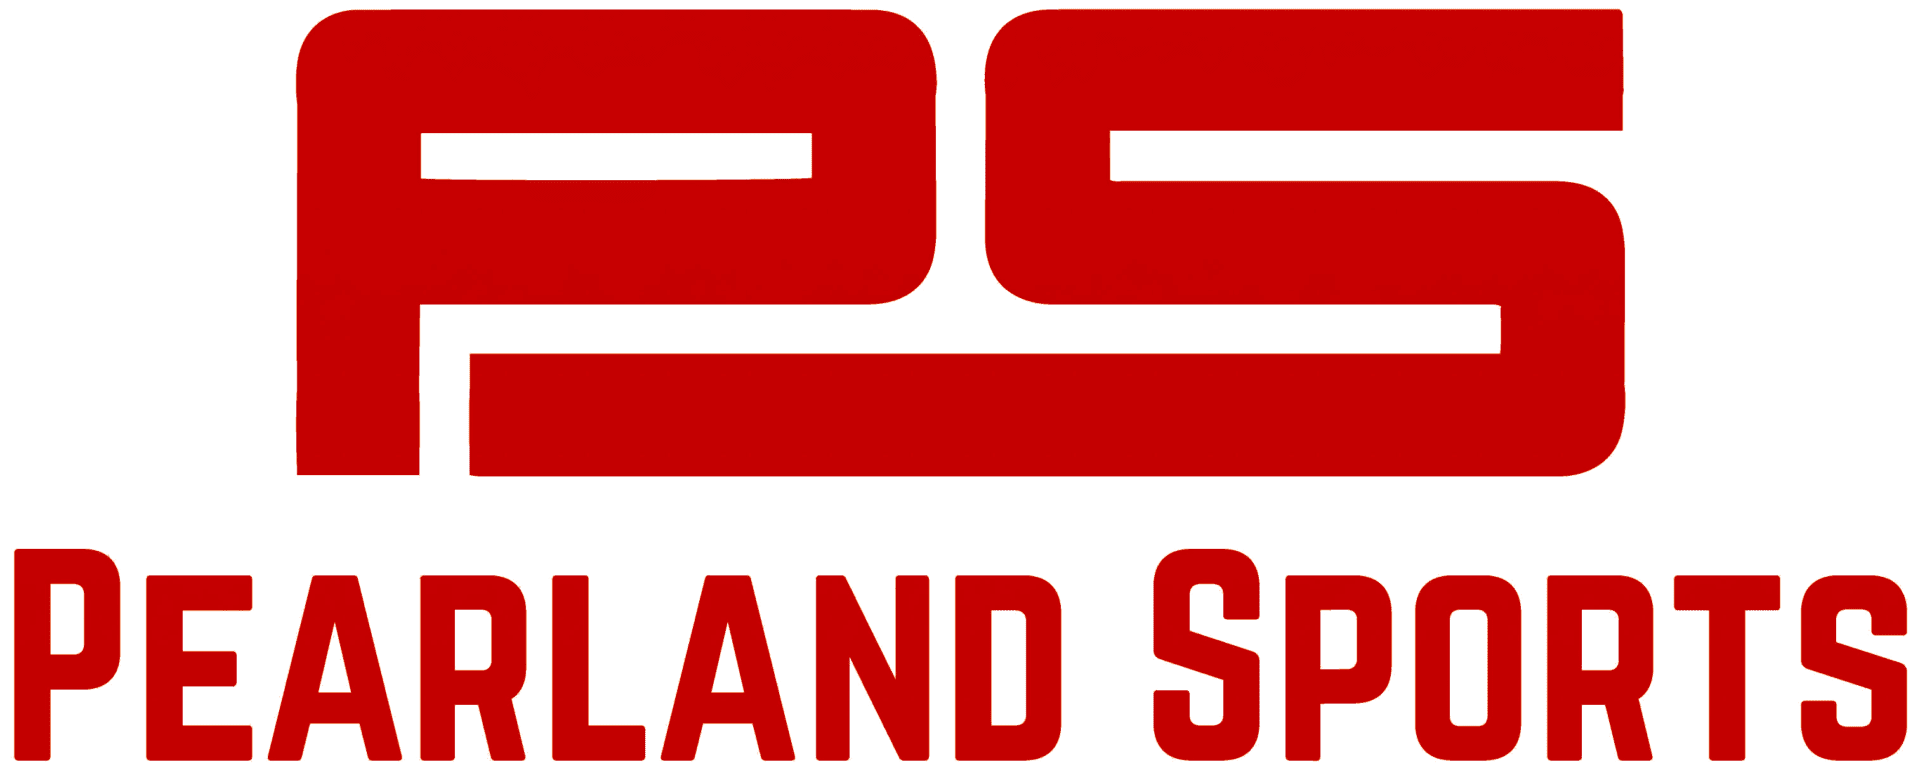 Pearland Sports Logo